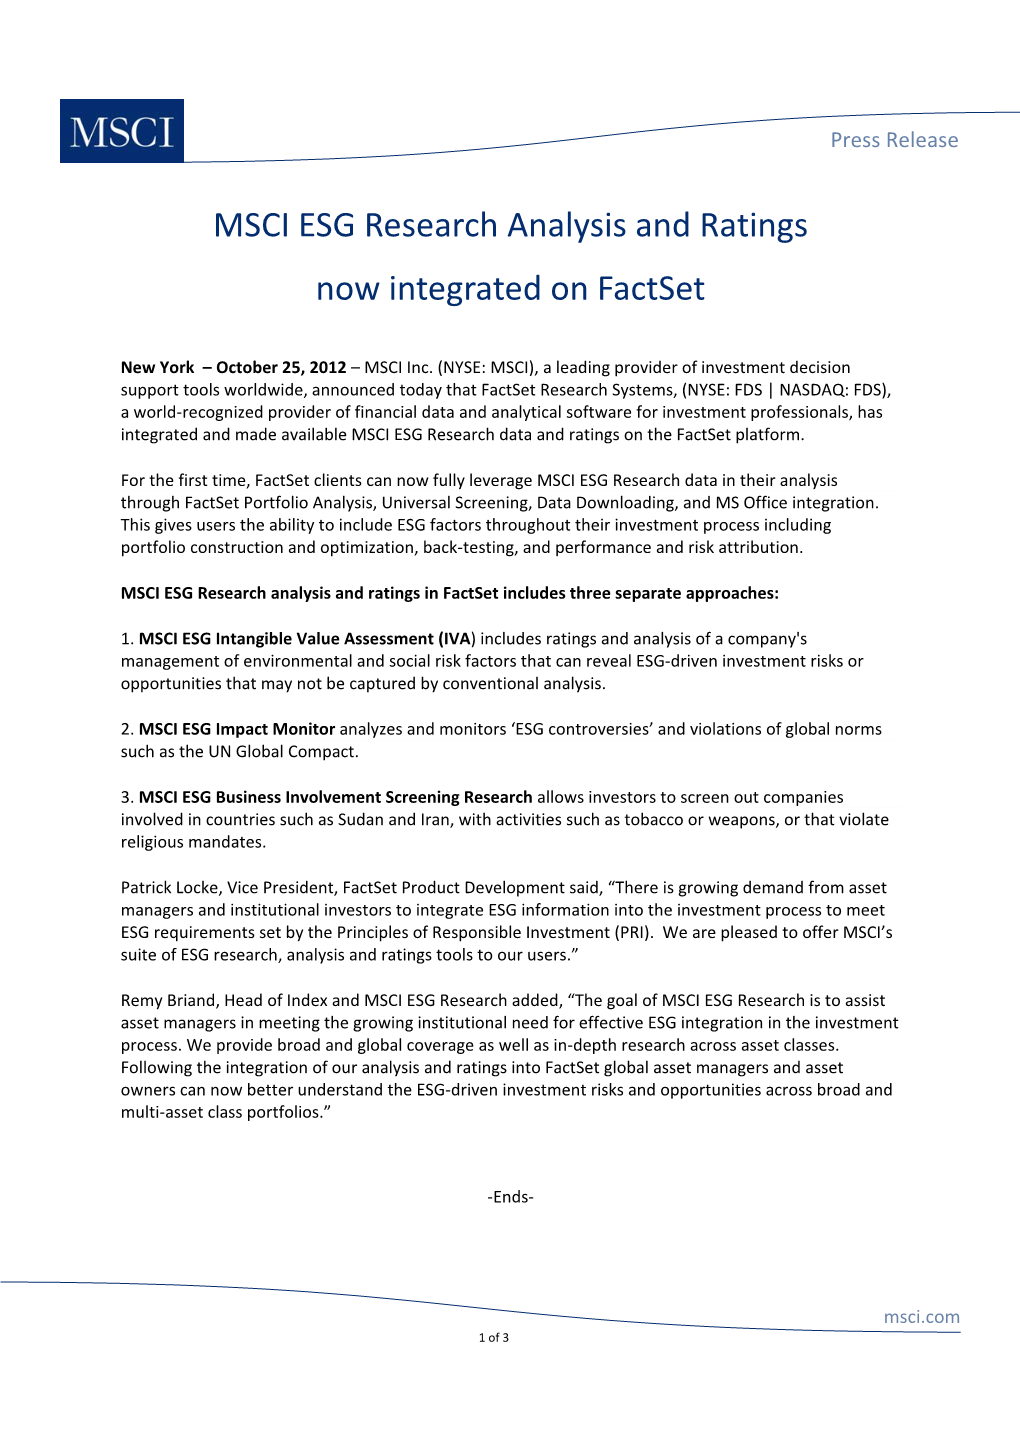 MSCI ESG Research Analysis and Ratings Now Integrated on Factset